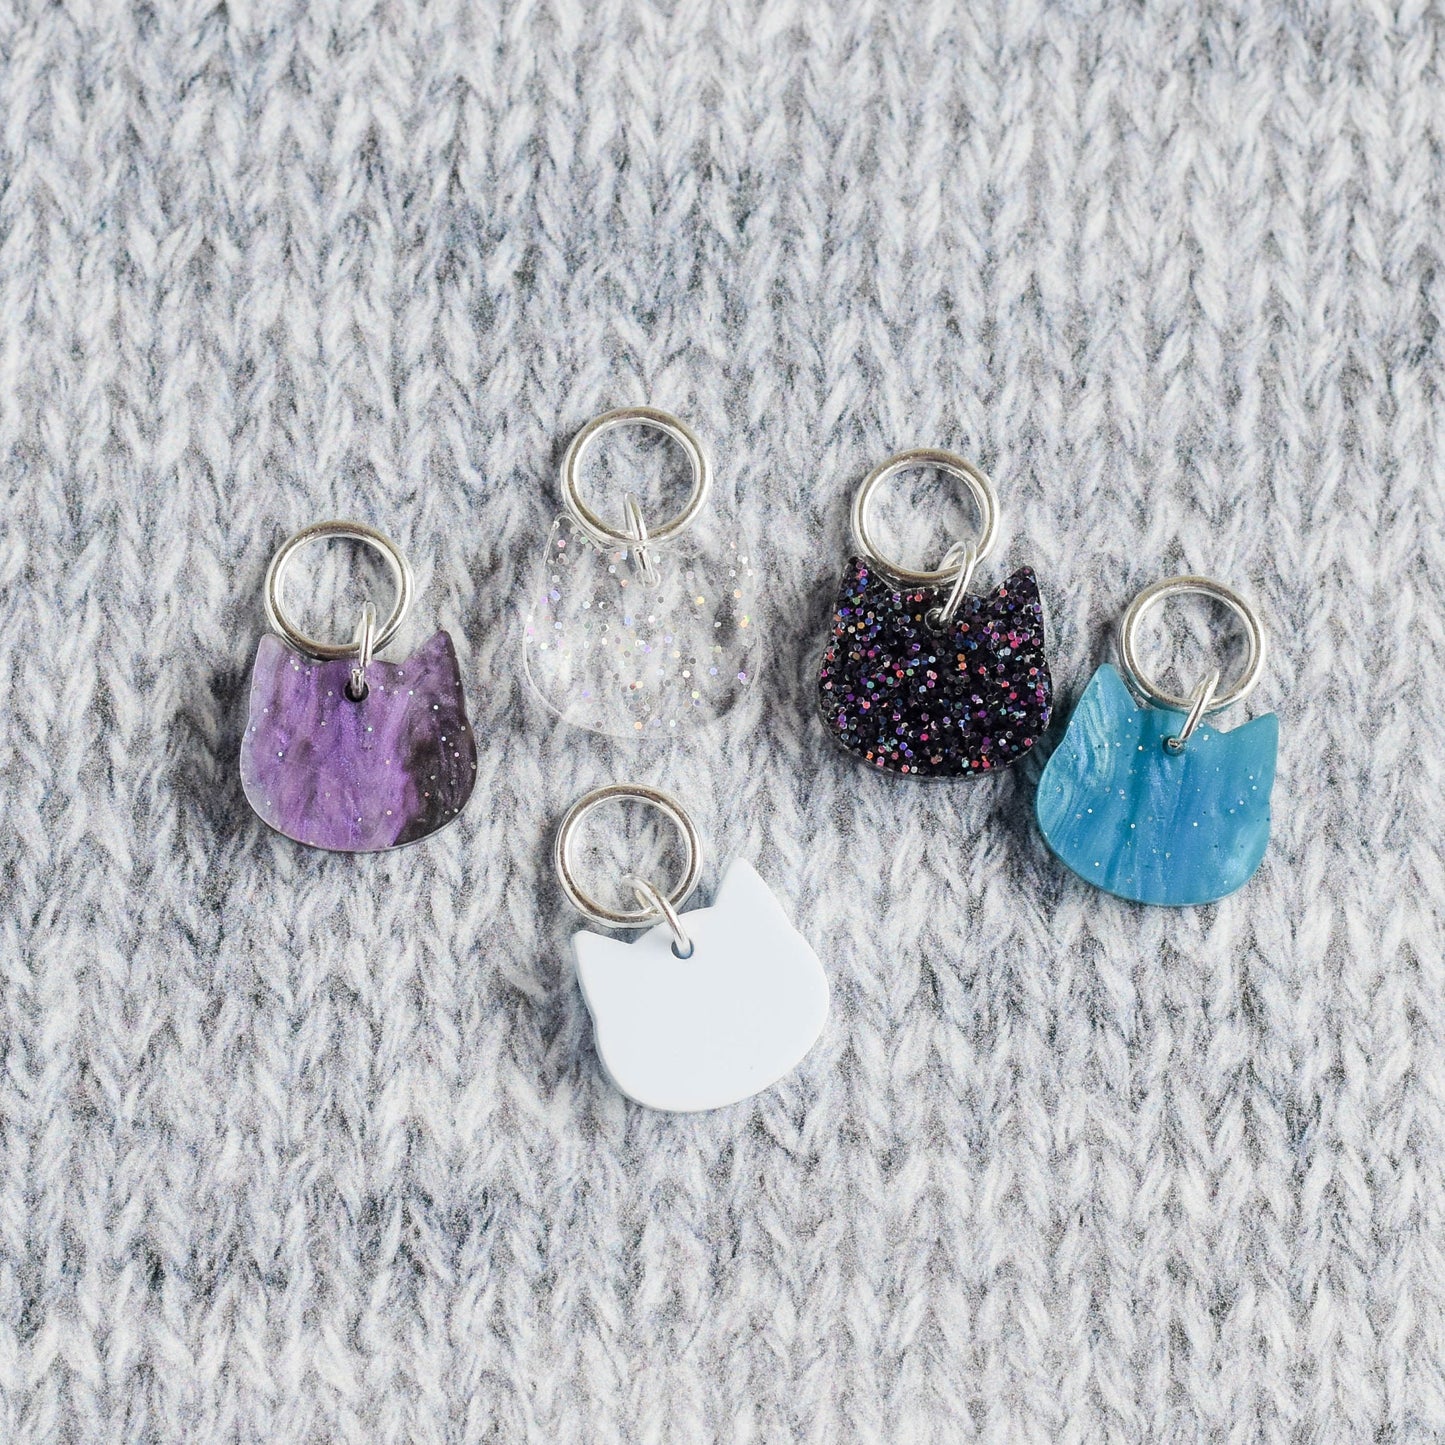 Set of 5 Cat Stitch Markers - Galaxy - Cat Markers, Laser Engraved Acrylic Stitch Markers, Purple and Blue Acrylic Stitch Markers